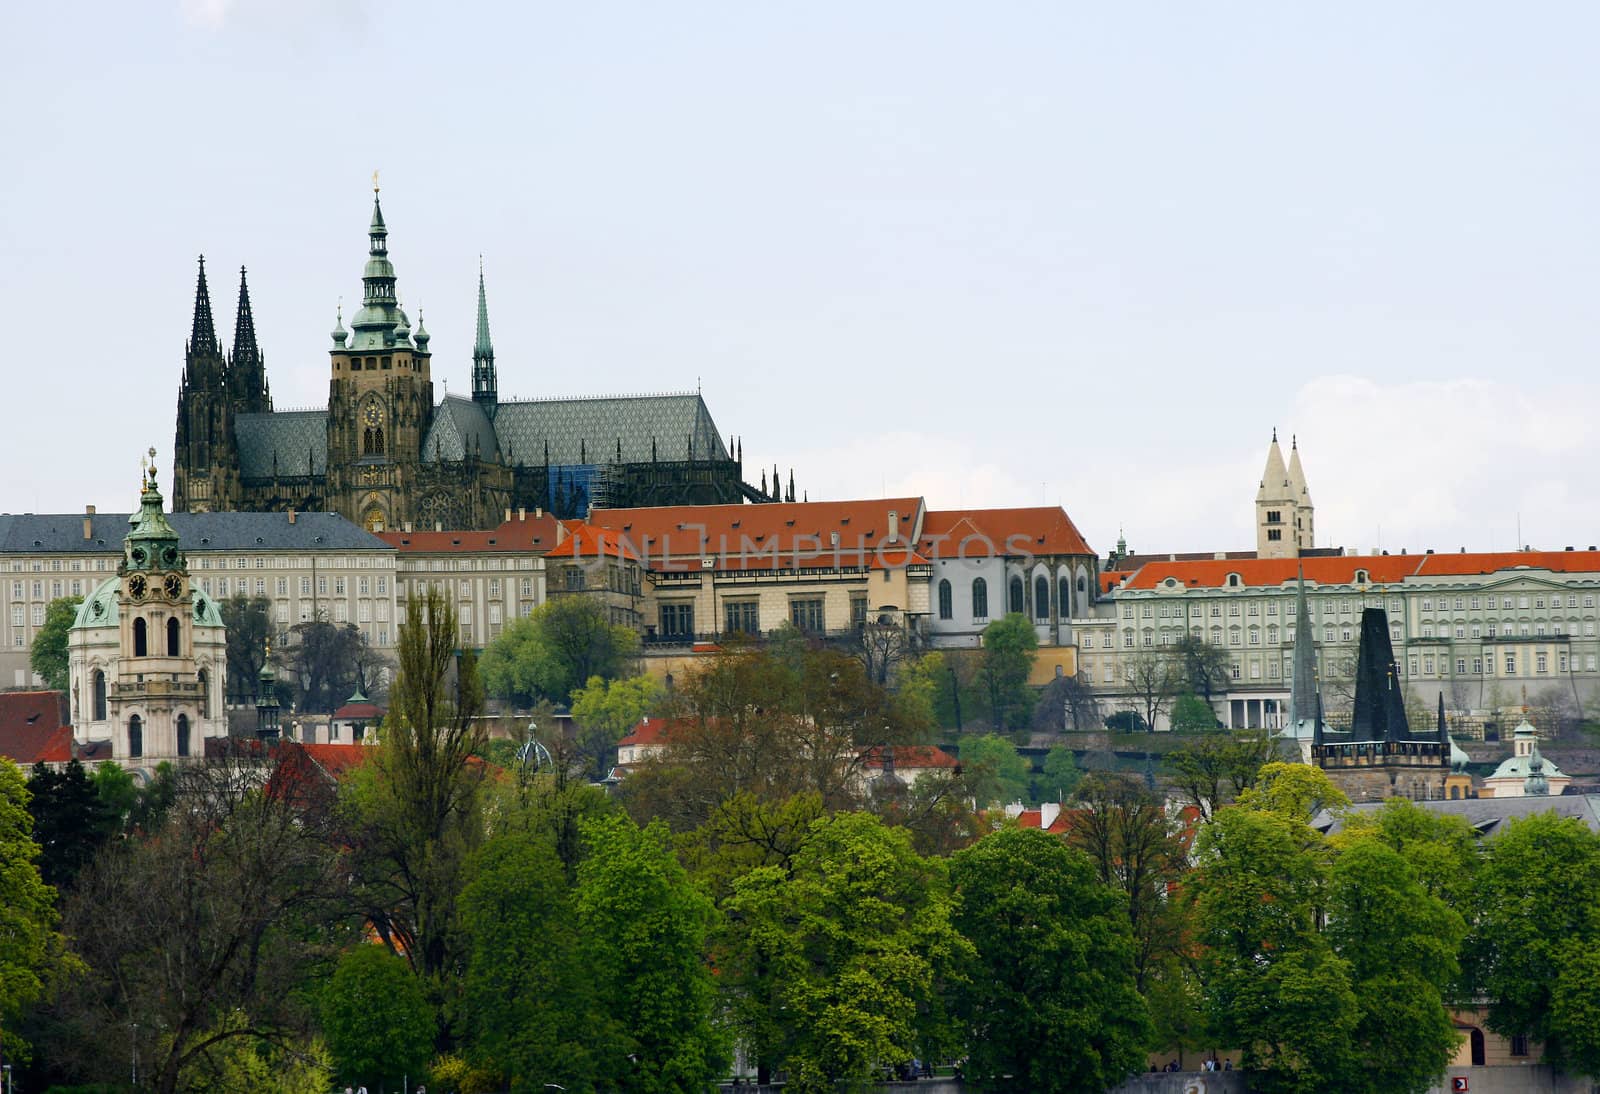 View from Prgaue city center: Prague Castle and St. Vitus Cathedral